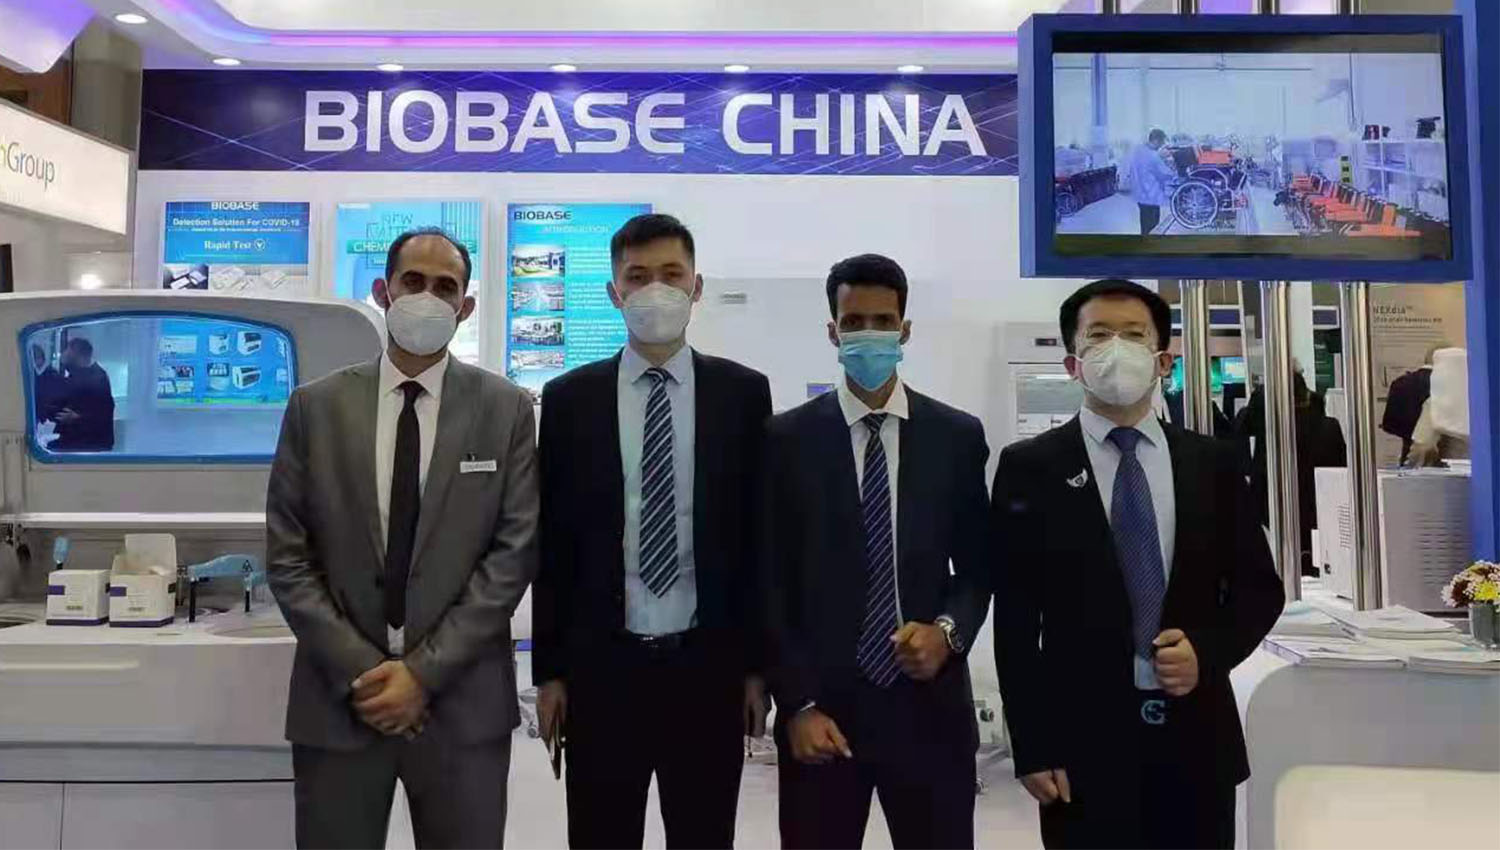 BIOBASE Shows the Group's Strength at the MEDLAB Exhibition